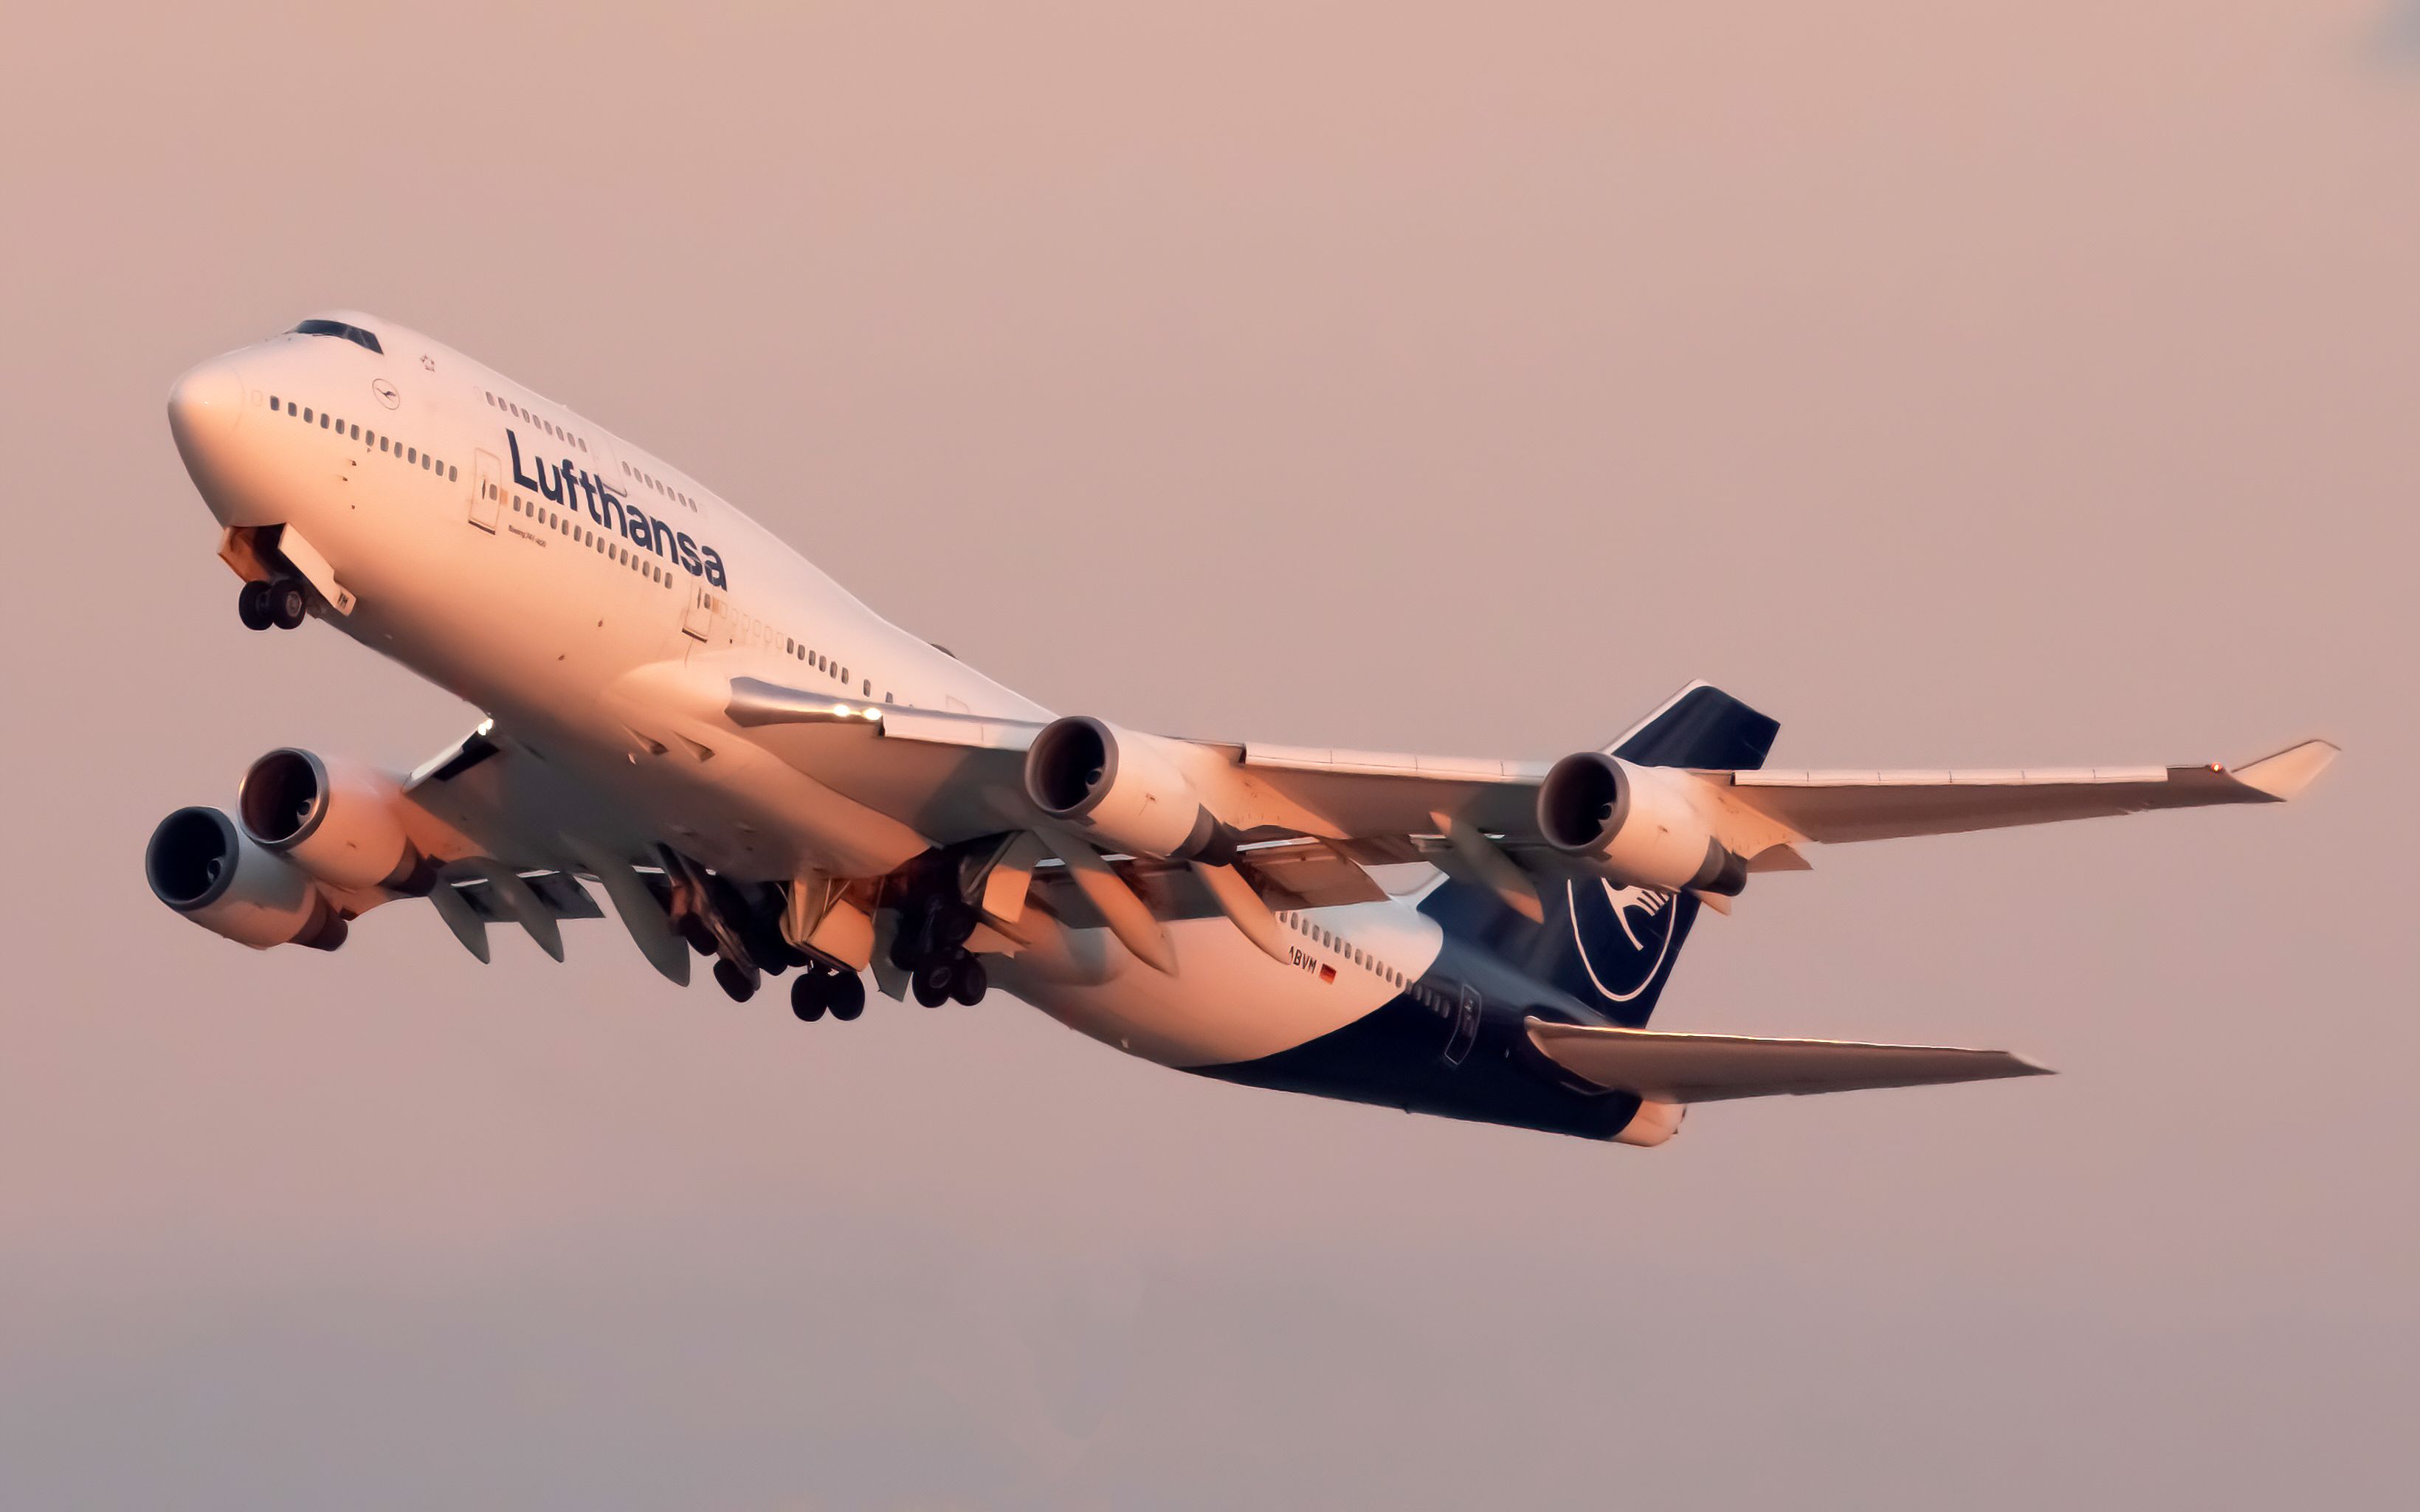 A Lufthansa Boeing 747-430 flying in the sky.